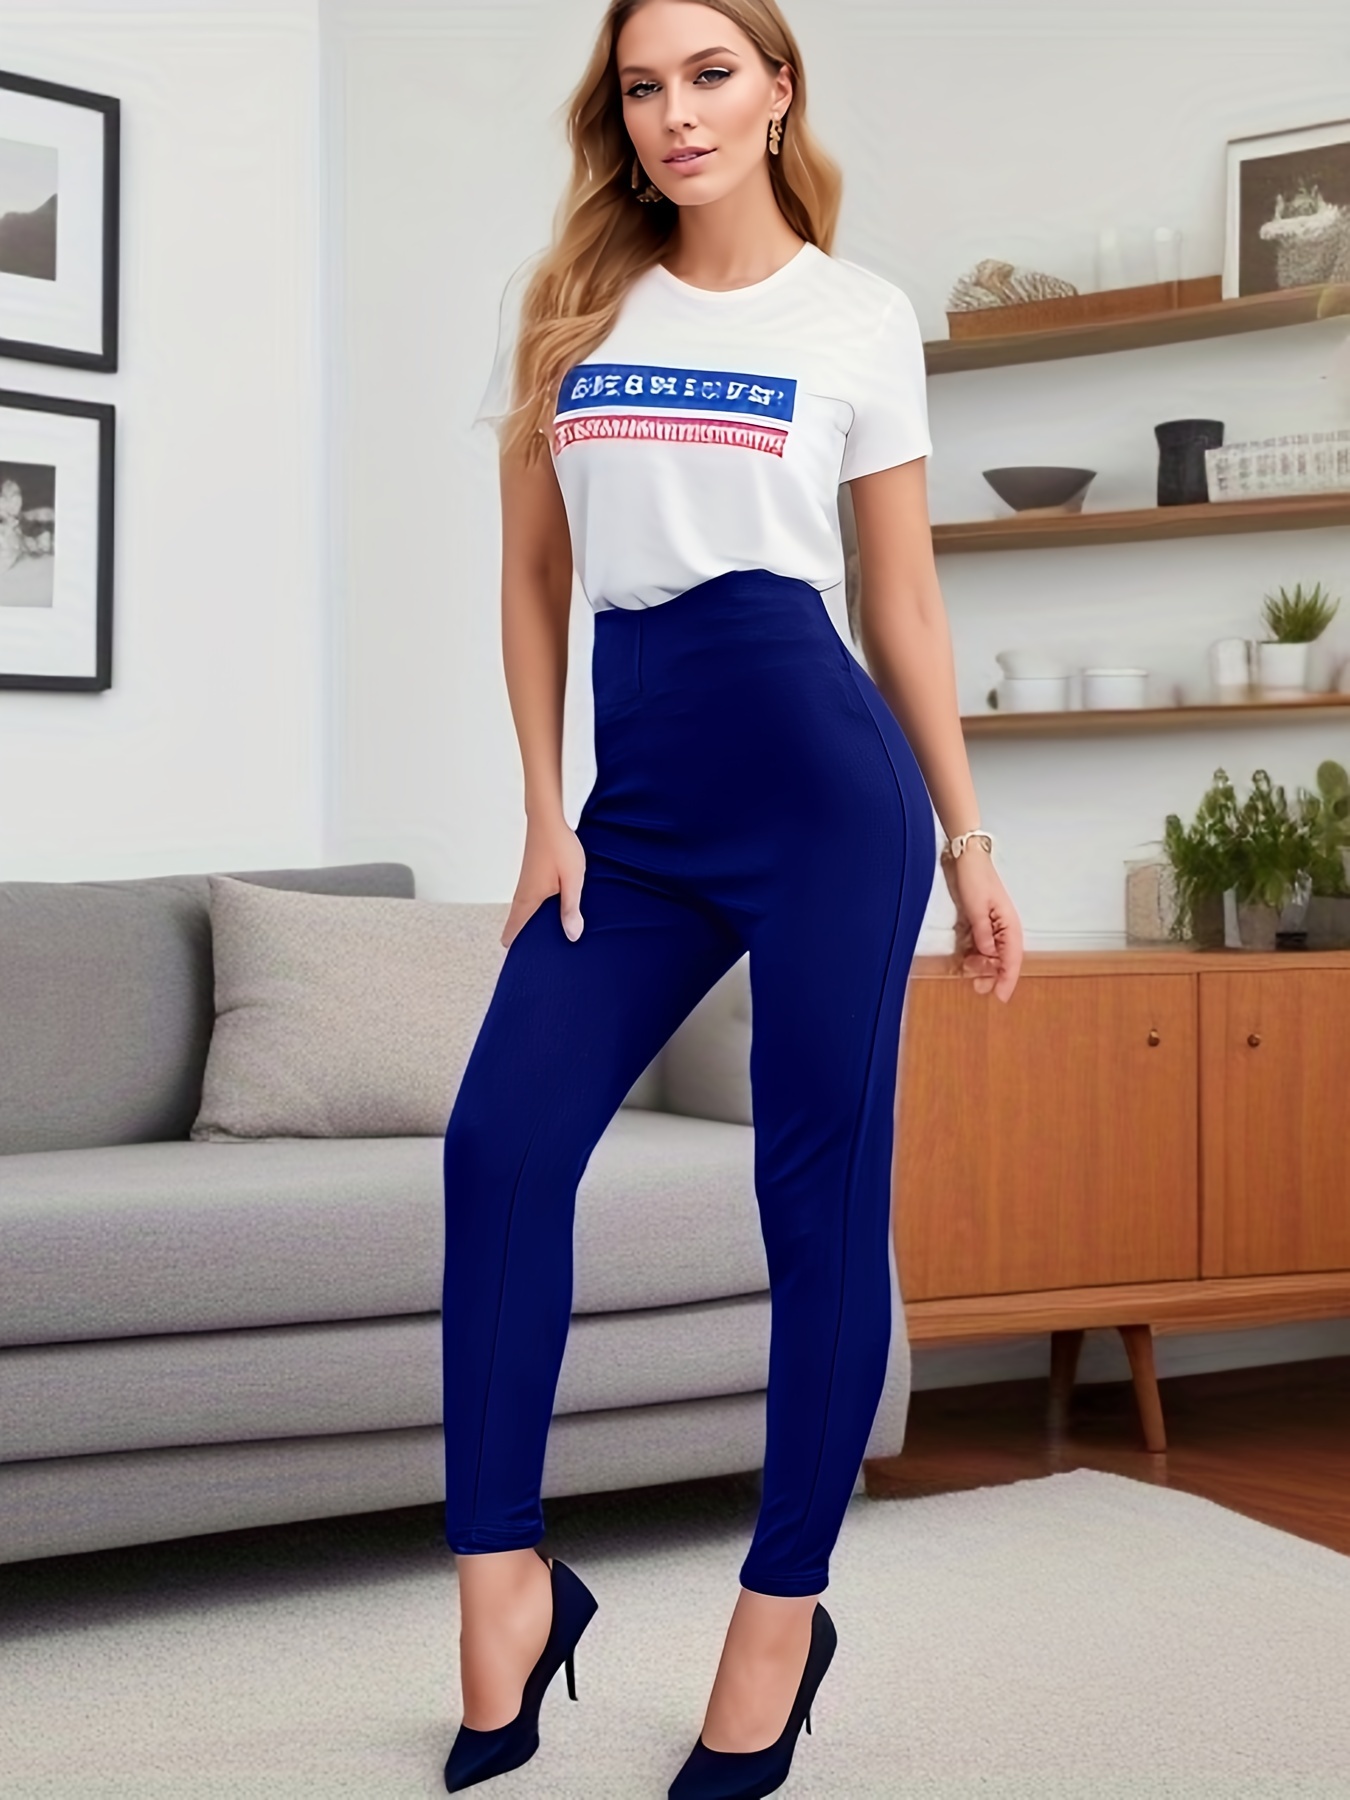 Solid High Waist Skinny Jeans - Royal Blue